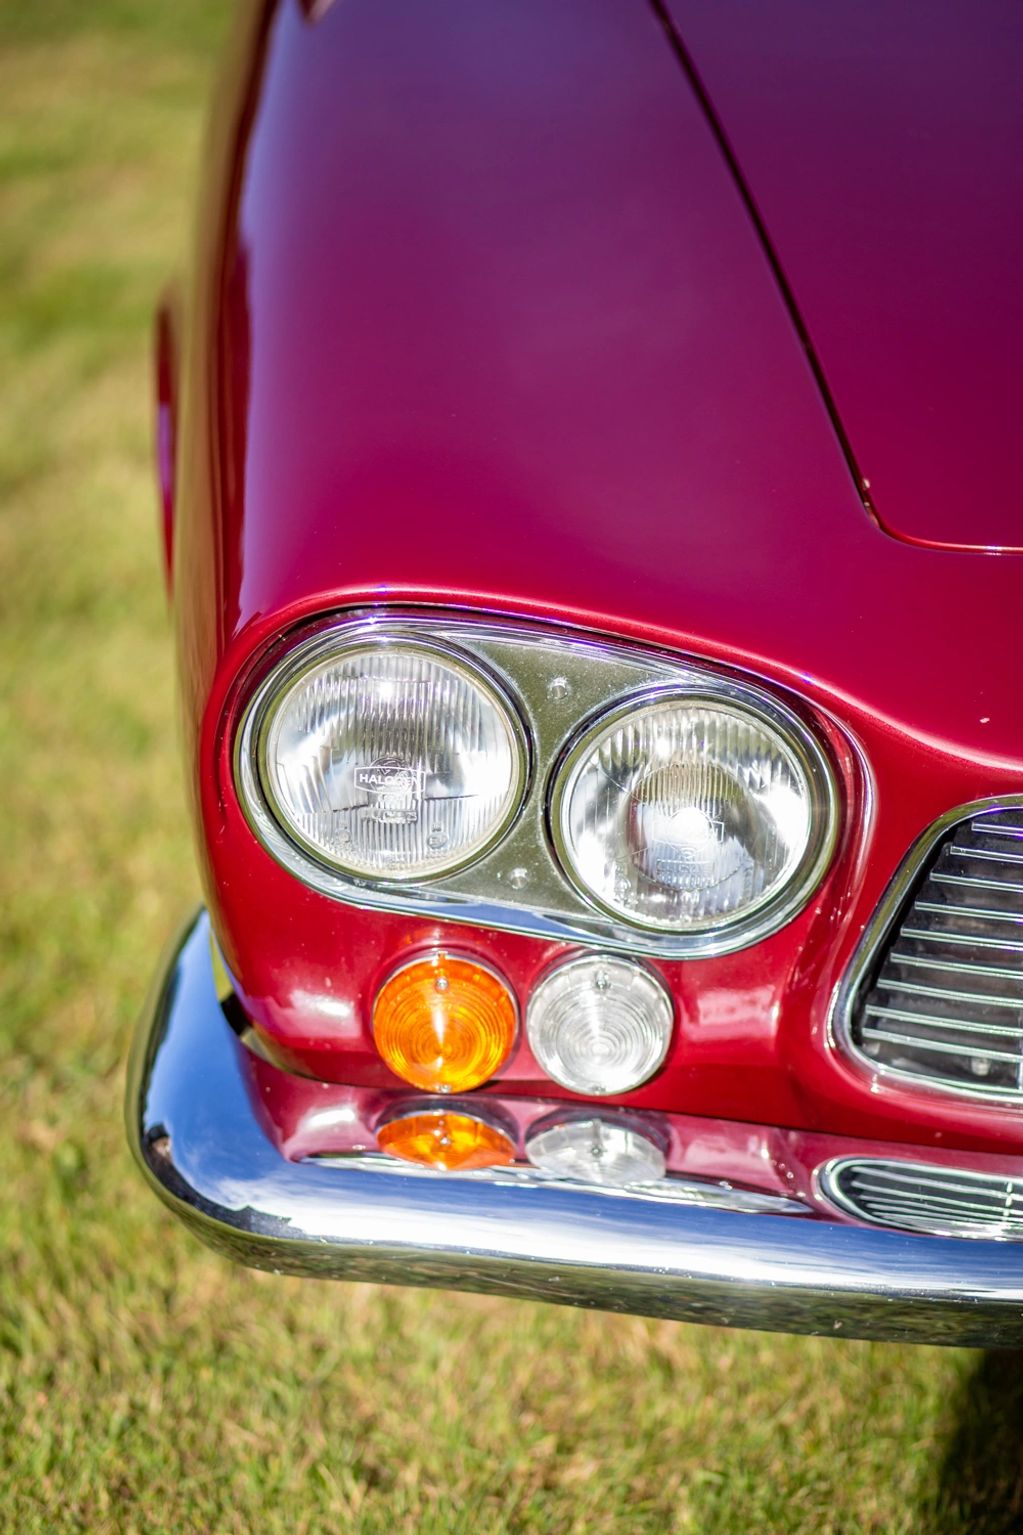 1966 Gordon Keeble GT, close-up view of headlamps 